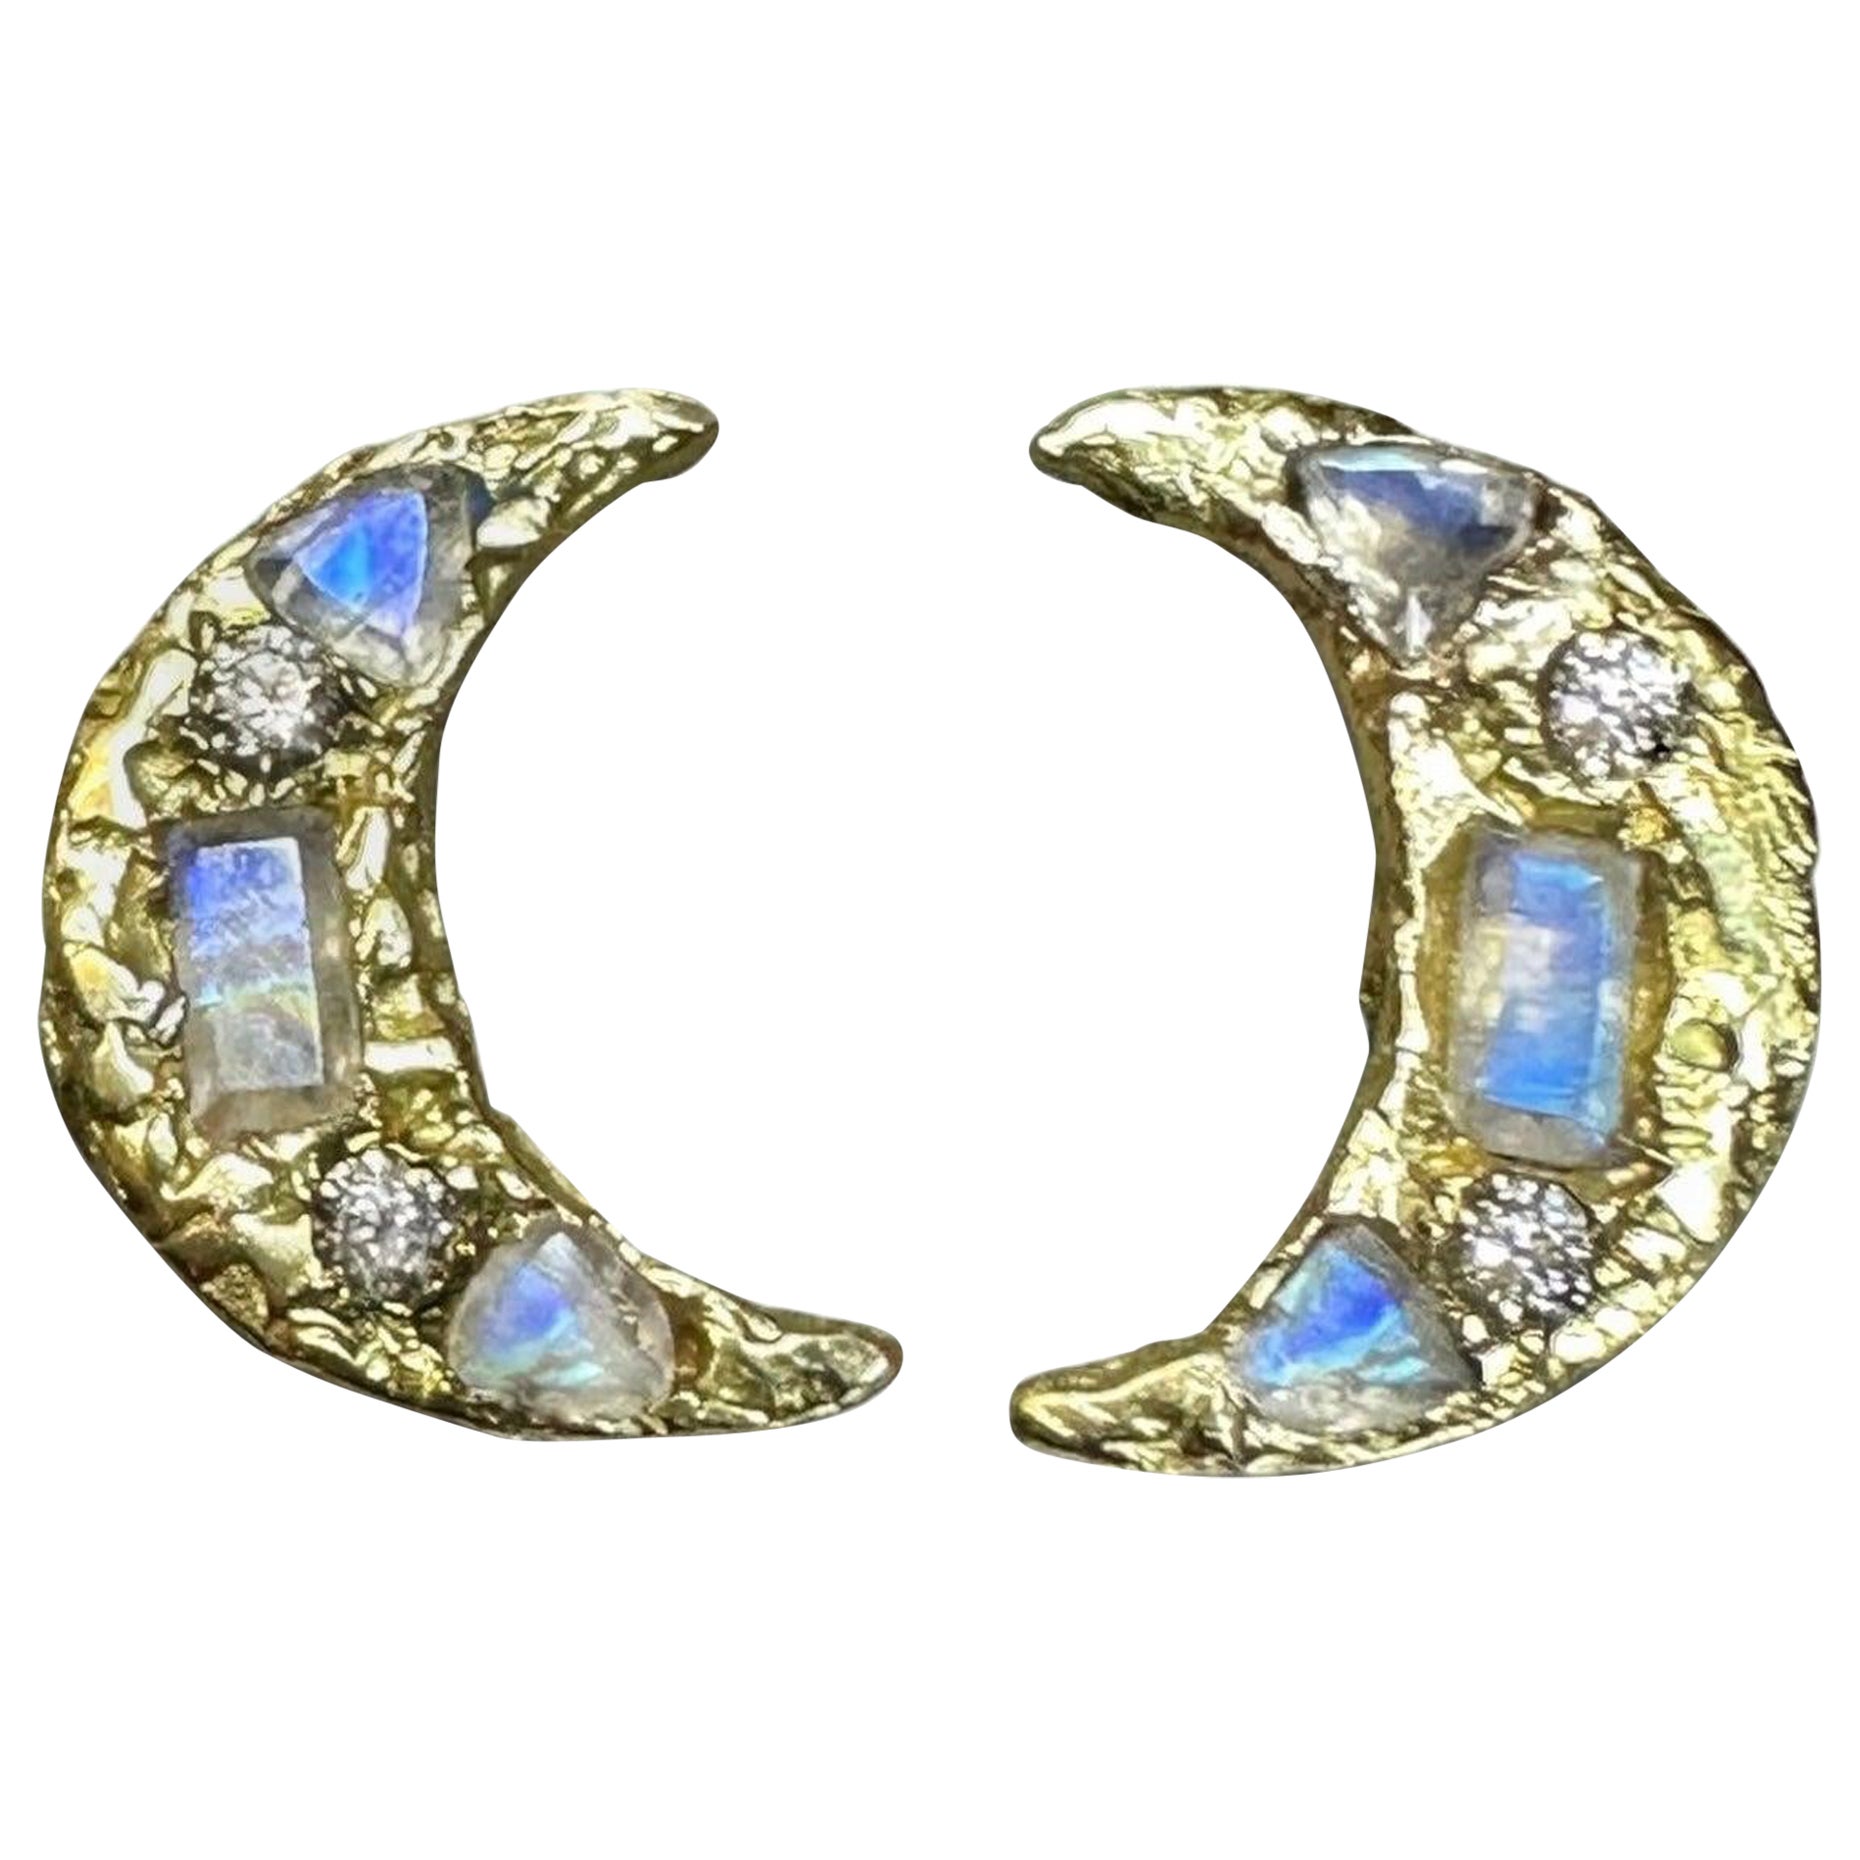 Moon Crescent stud Earrings Diamonds Moonstones in Gold one of a kind in stock